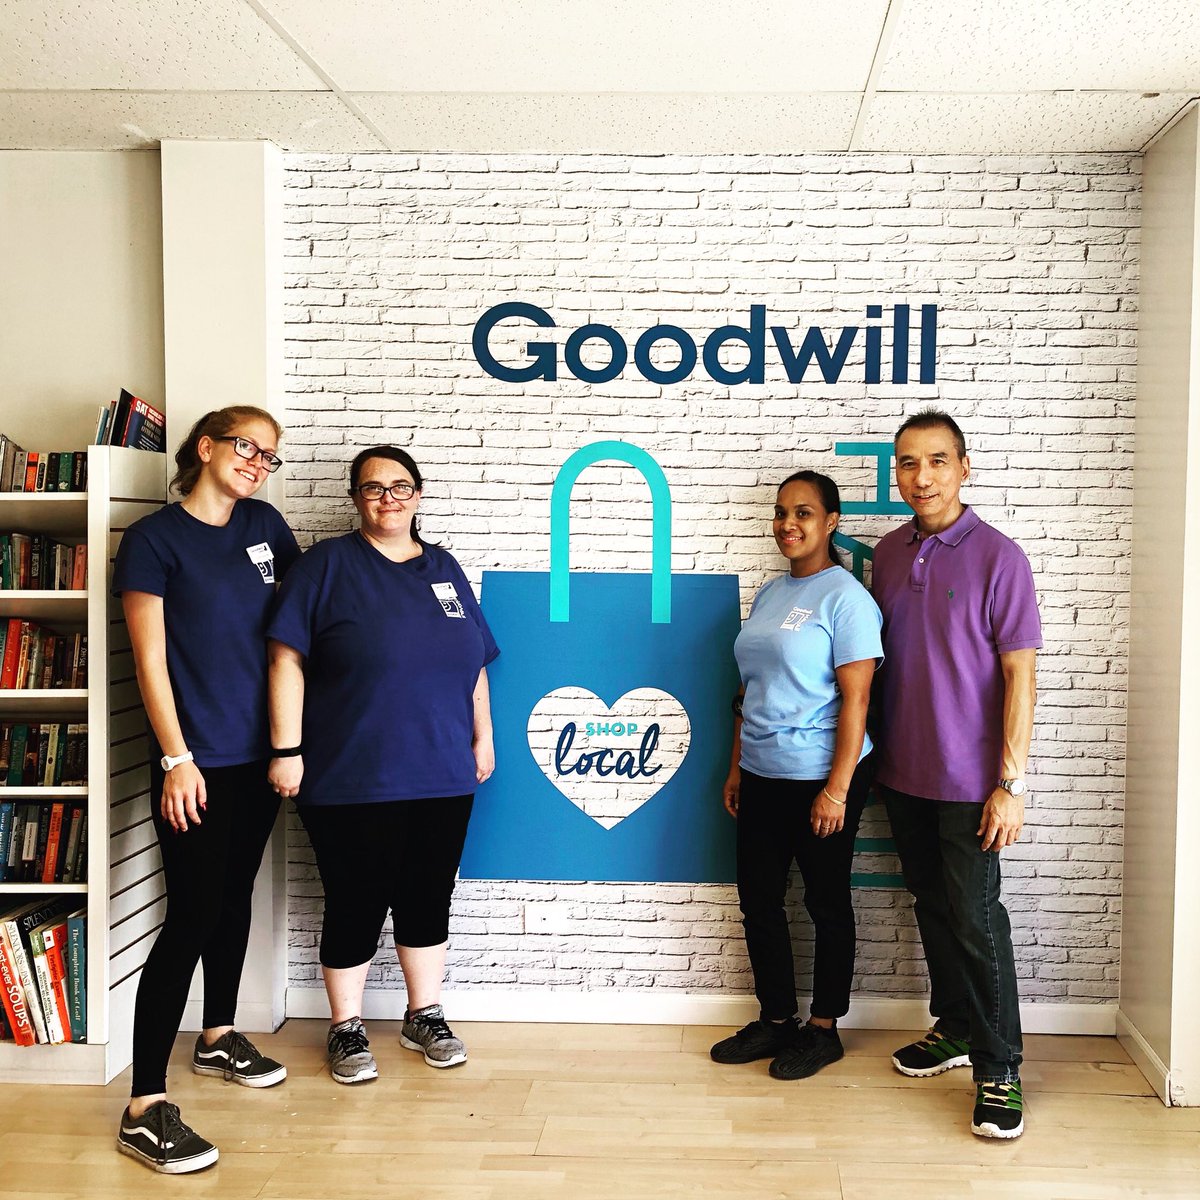 Goodwill Kakaako is now open at 614 Cooke St Suite #100 Honolulu, HI 96813 (Customer parking is available to the left of the building and in front of the store) Shop unique finds in apparel, home, accessories, and more!